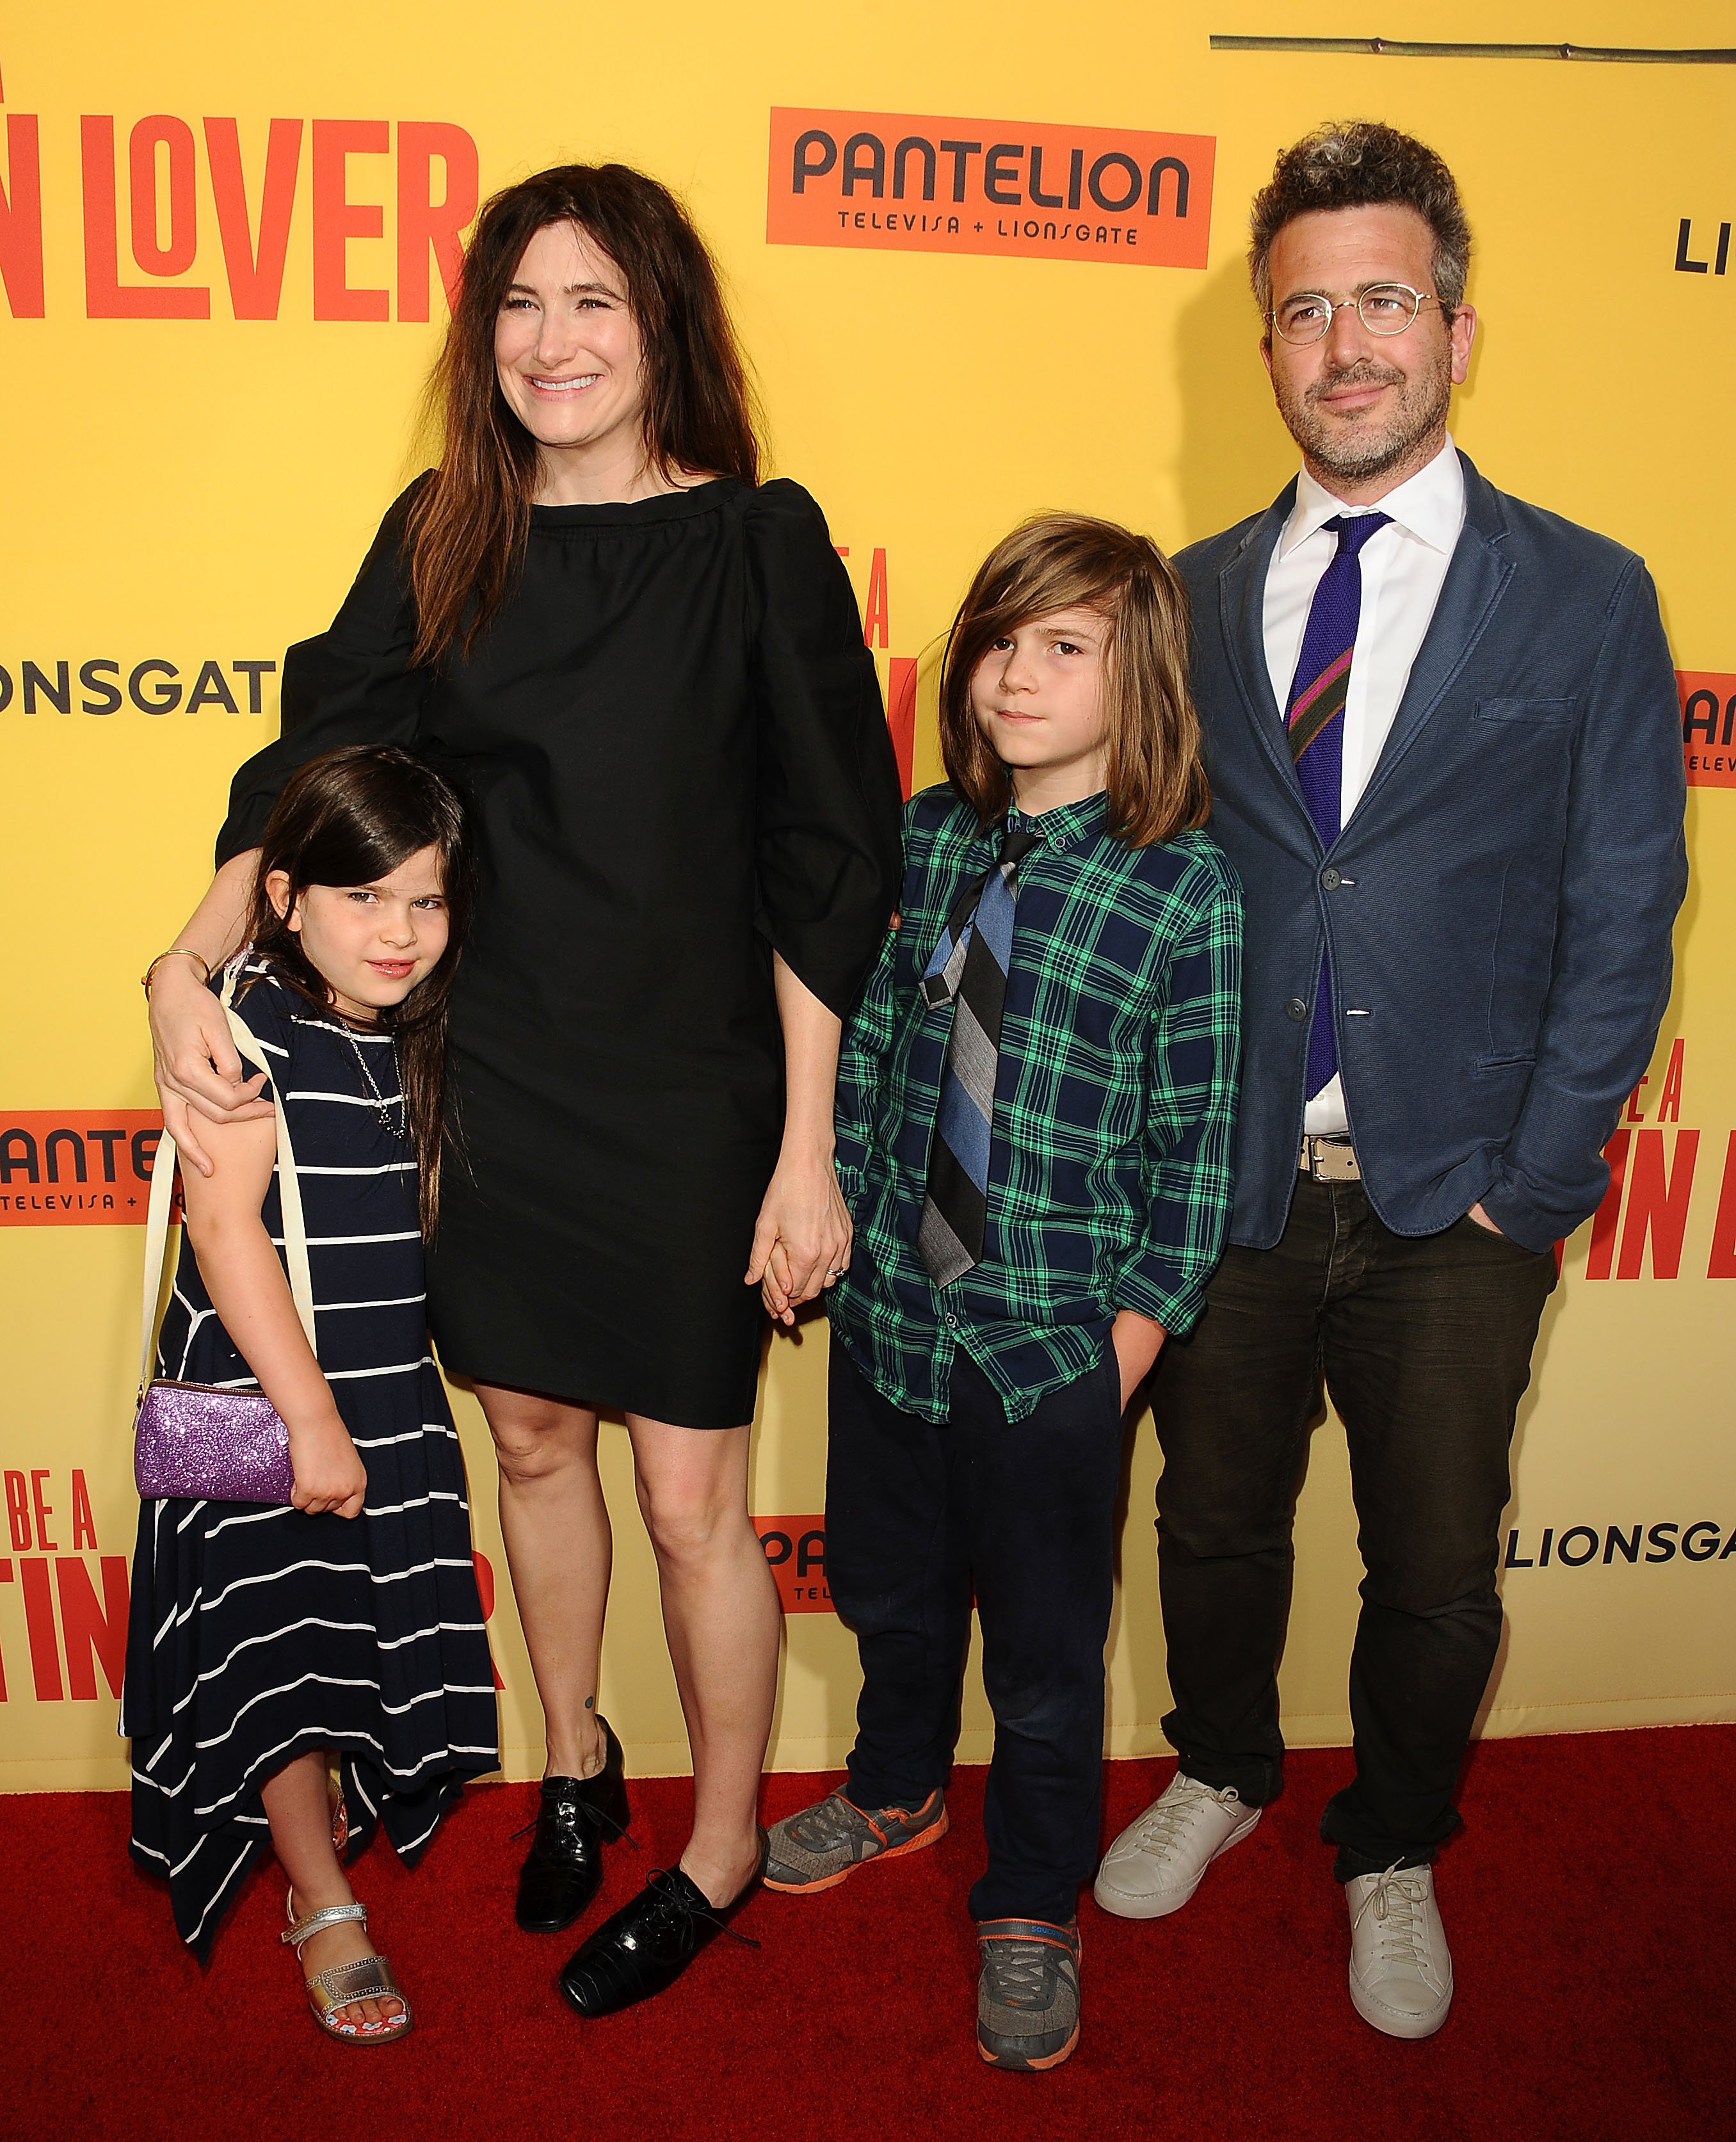 Actress Kathryn Hahn and actor Ethan Sandler and children attend the premiere of "How to Be a Latin Lover" at ArcLight Cinemas Cinerama Dome on April 26, 2017 in Hollywood, California. | Source: Getty Images